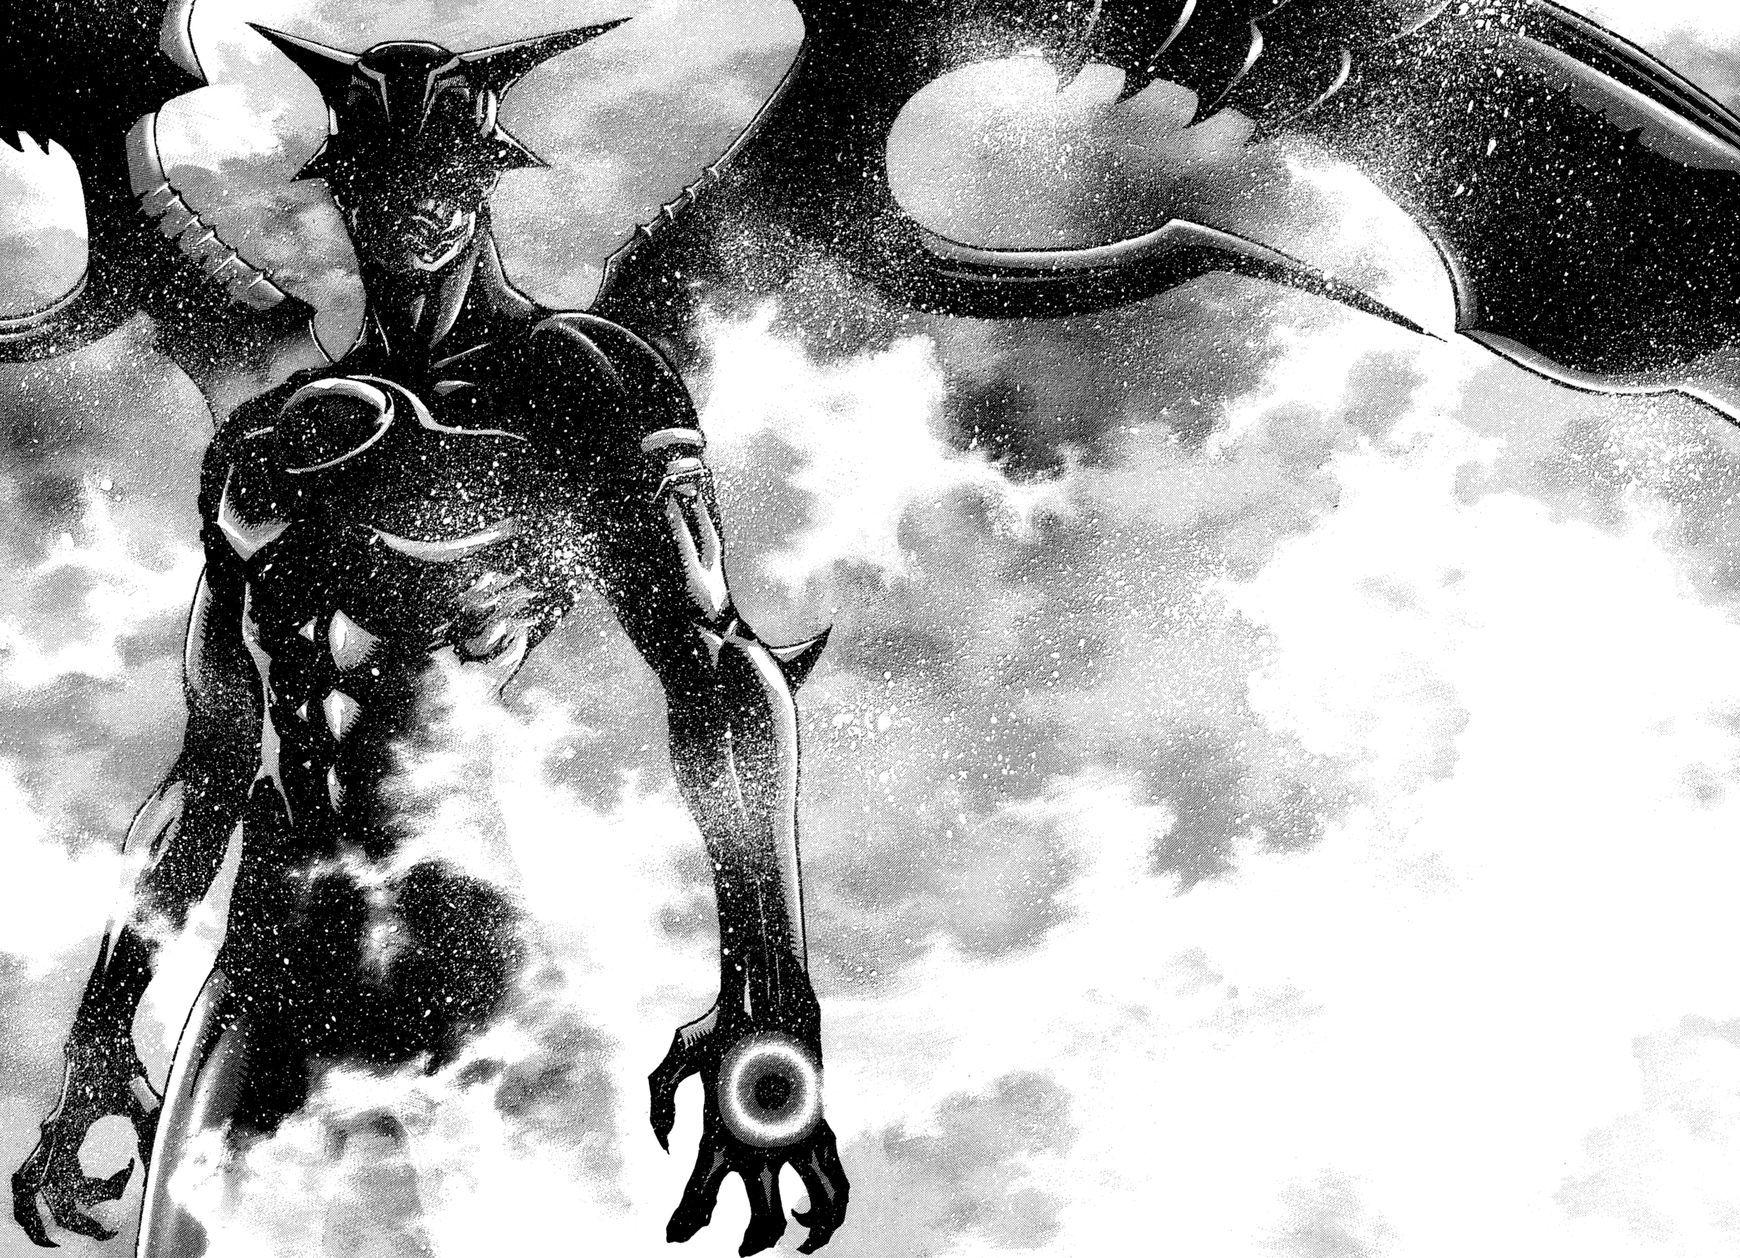 This is from the current chapter of Zetman. Great manga